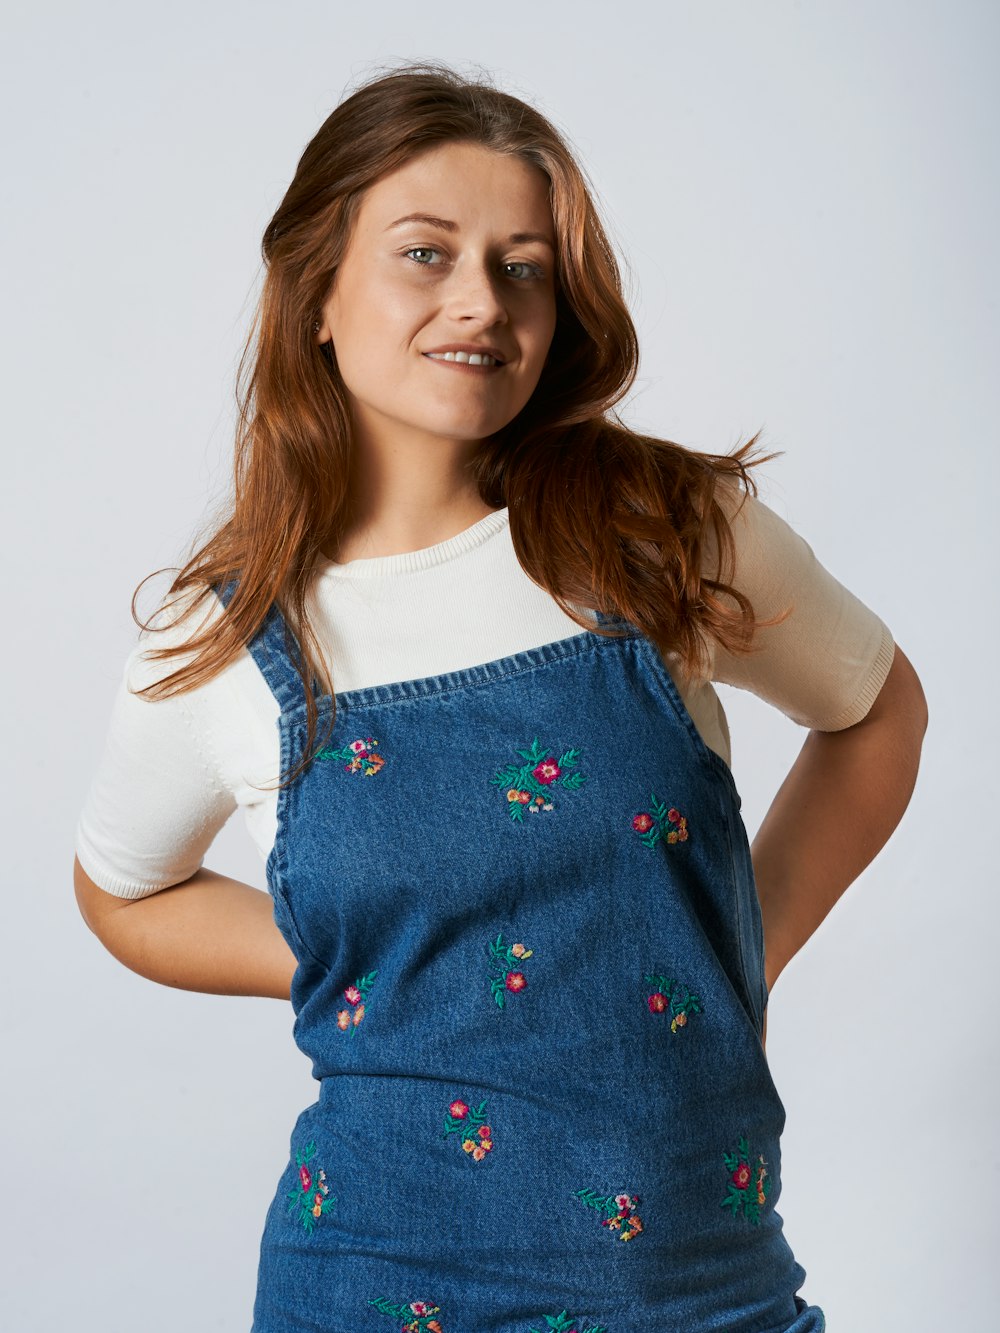 girl in white long sleeve shirt and blue denim dungaree